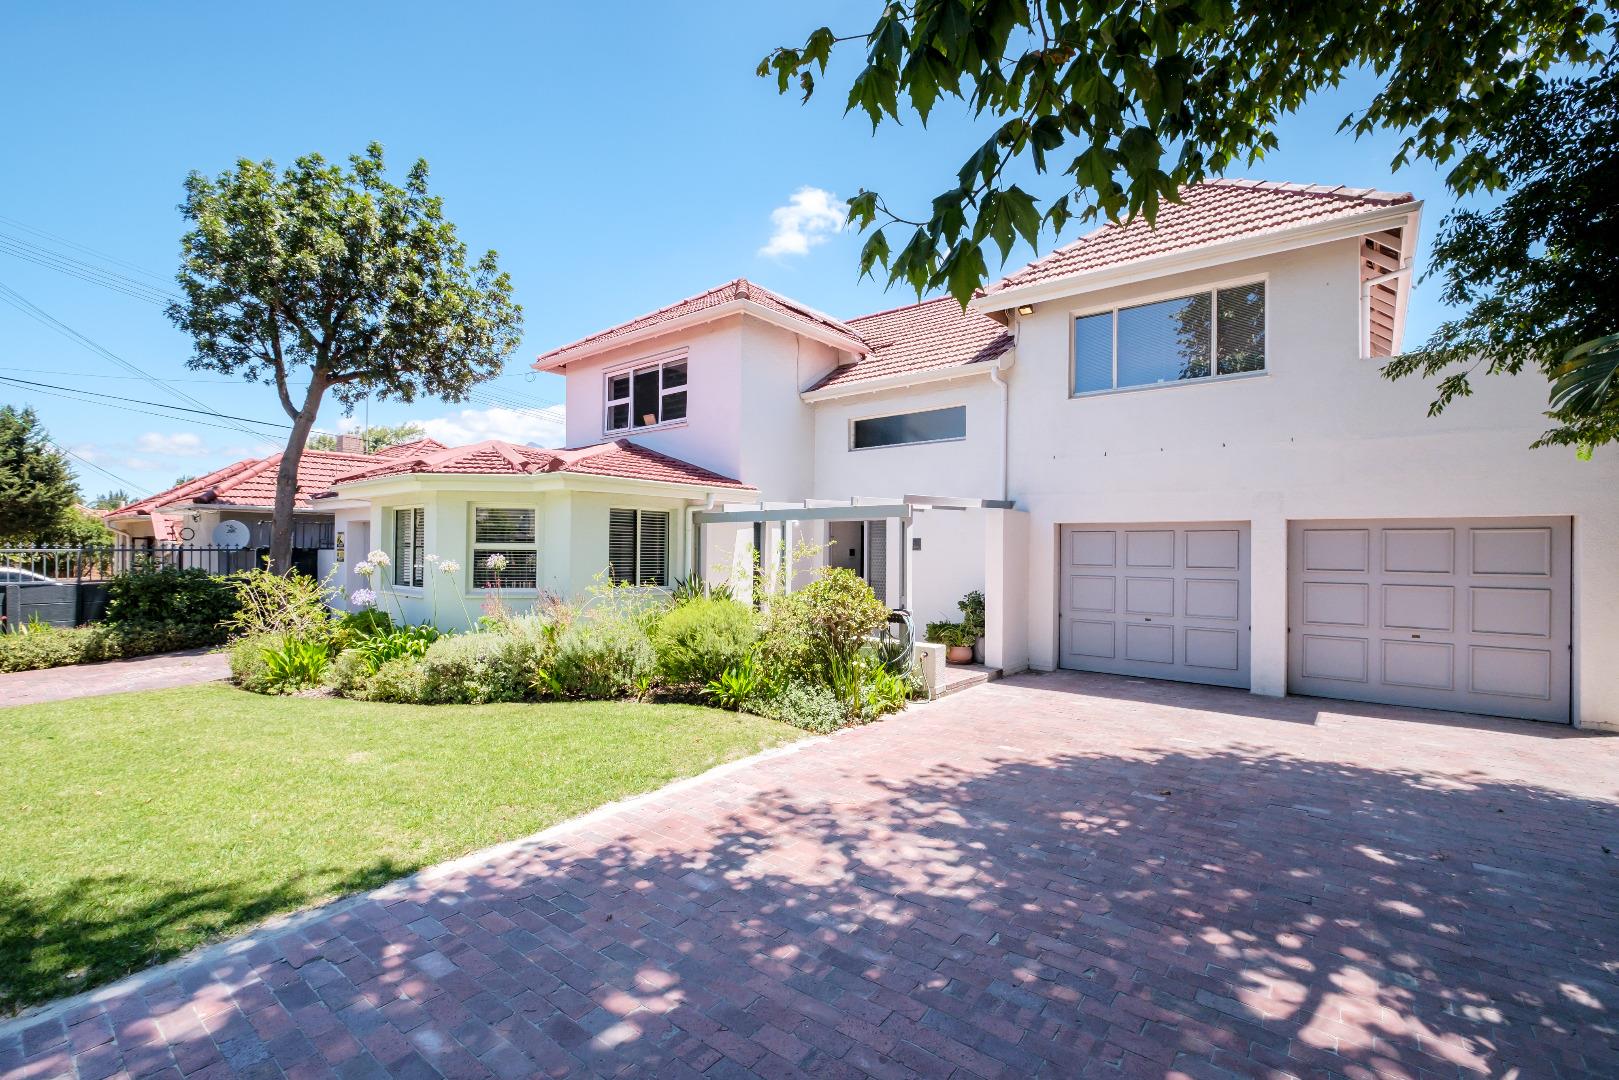 4 Bedroom  House for Sale in Cape Town - Western Cape